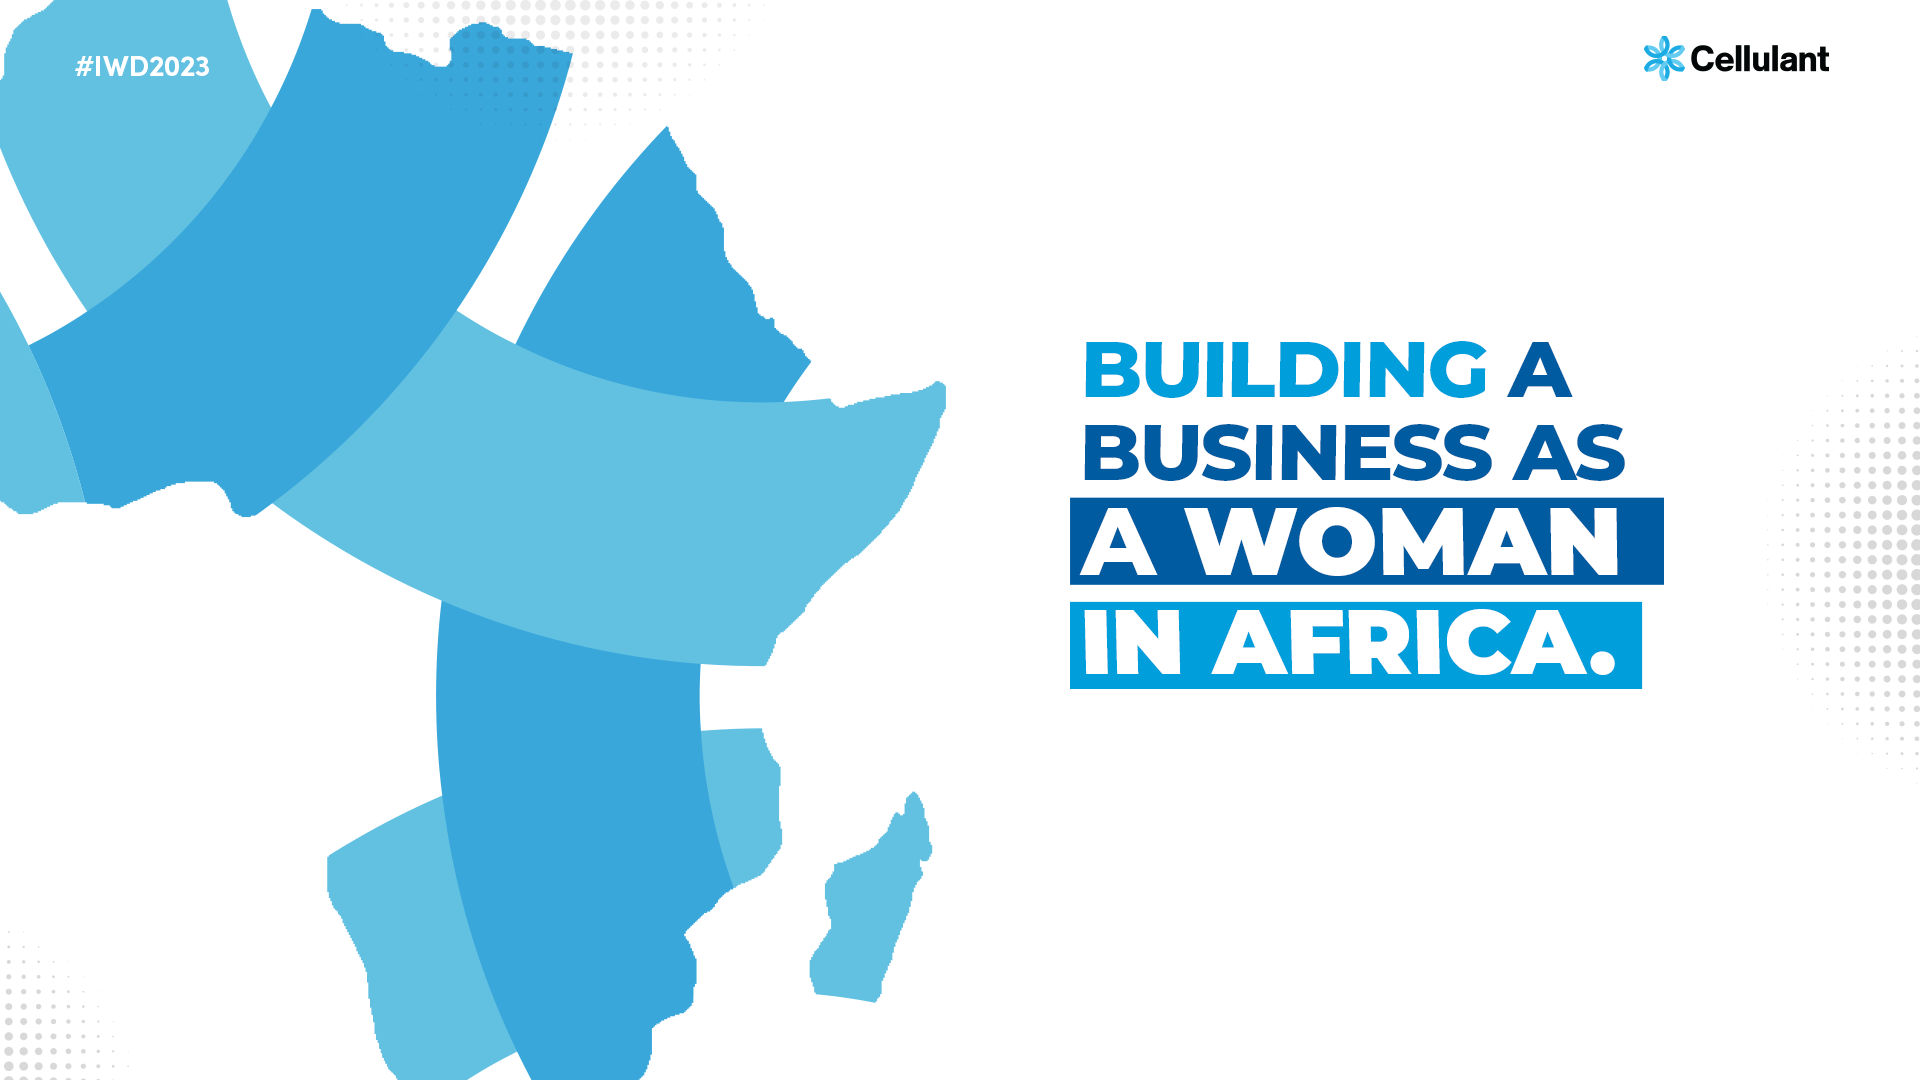 International Women’s Day: Building A Business As a Woman in Africa